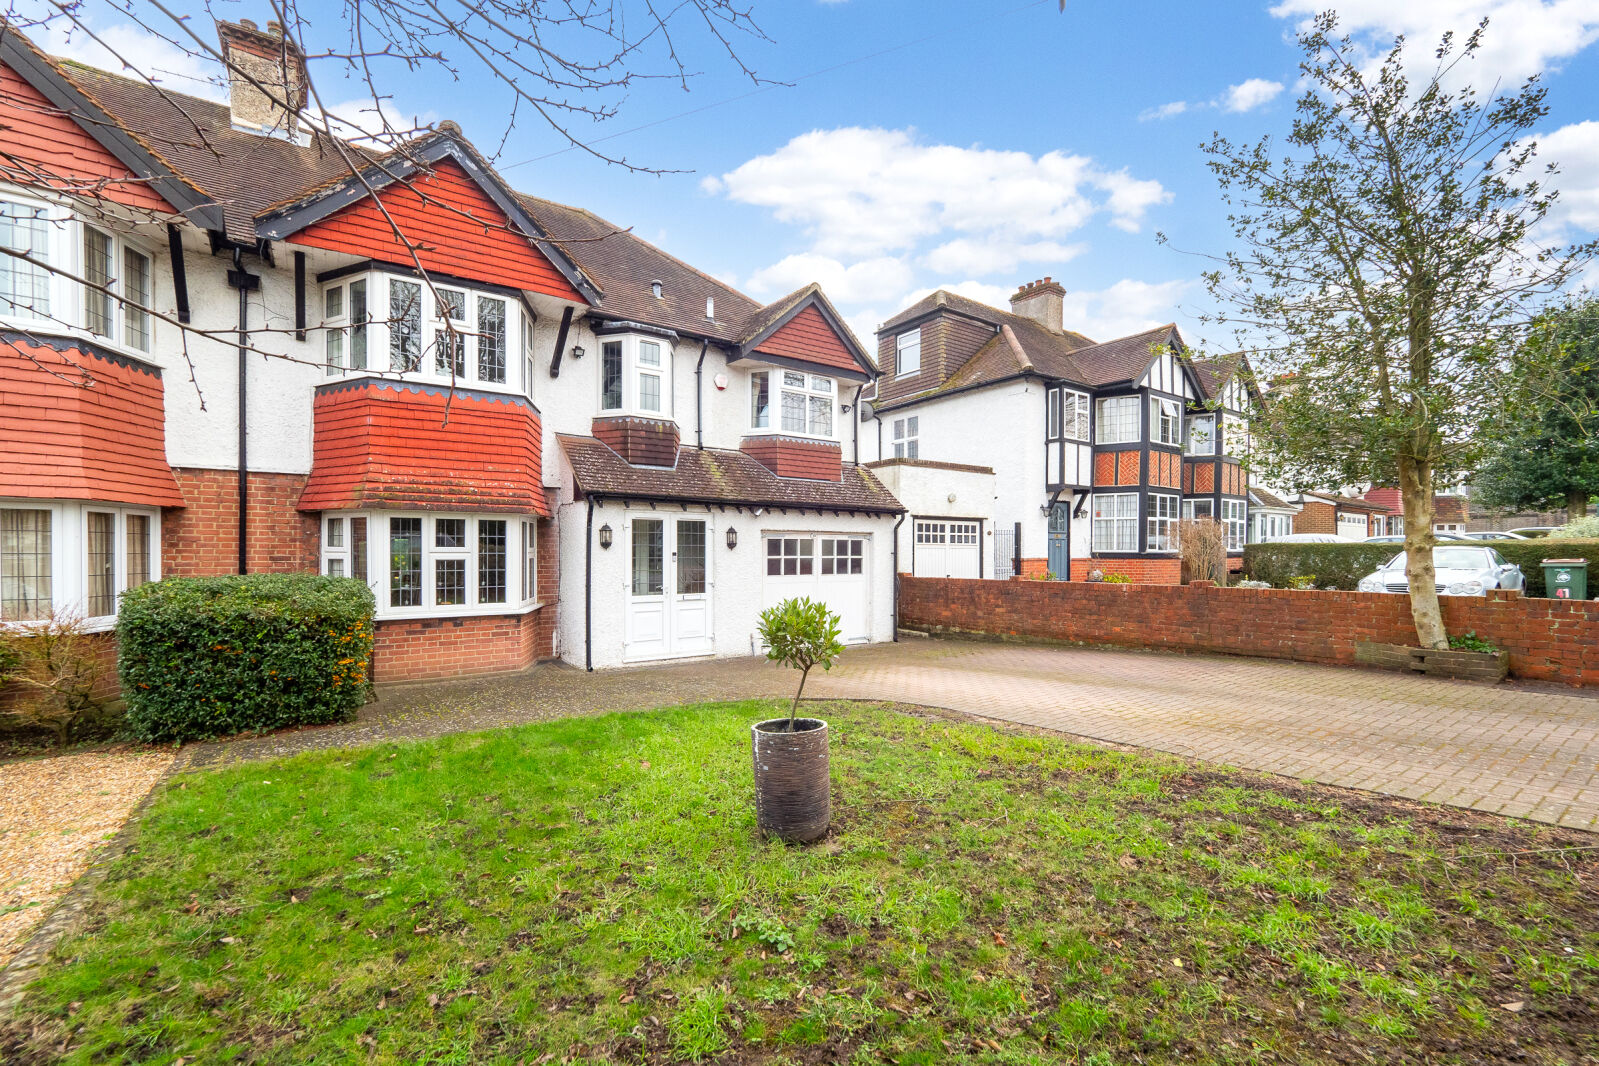 4 bedroom semi detached house for sale Fairway, Carshalton Beeches, SM5, main image